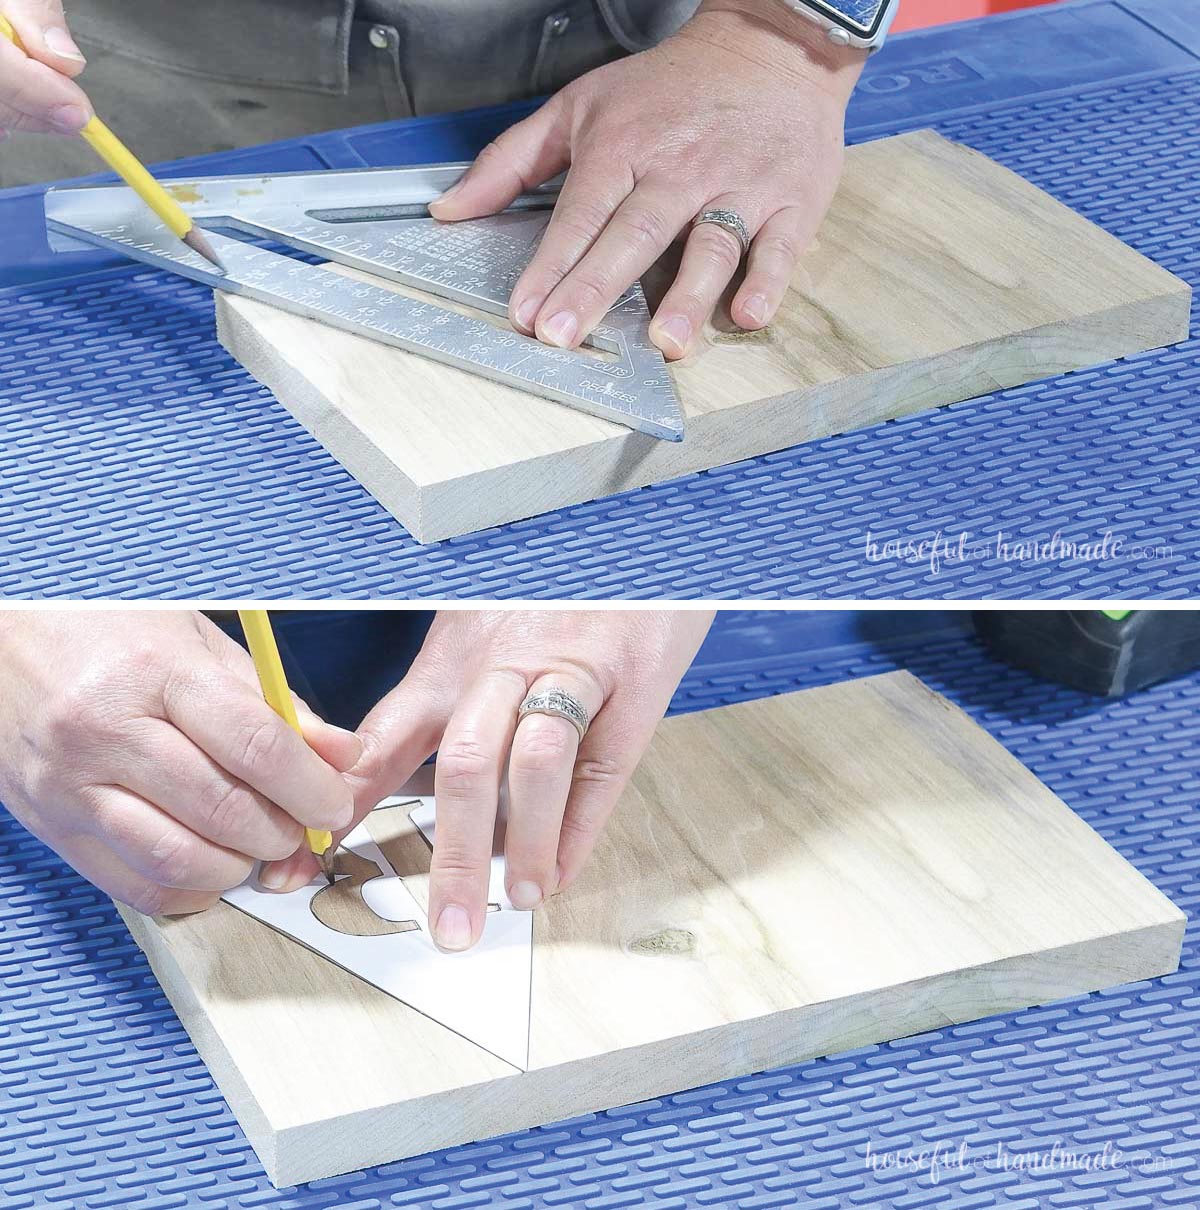 Drawing a triangle on a piece of wood and tracing a stencil letter on it.